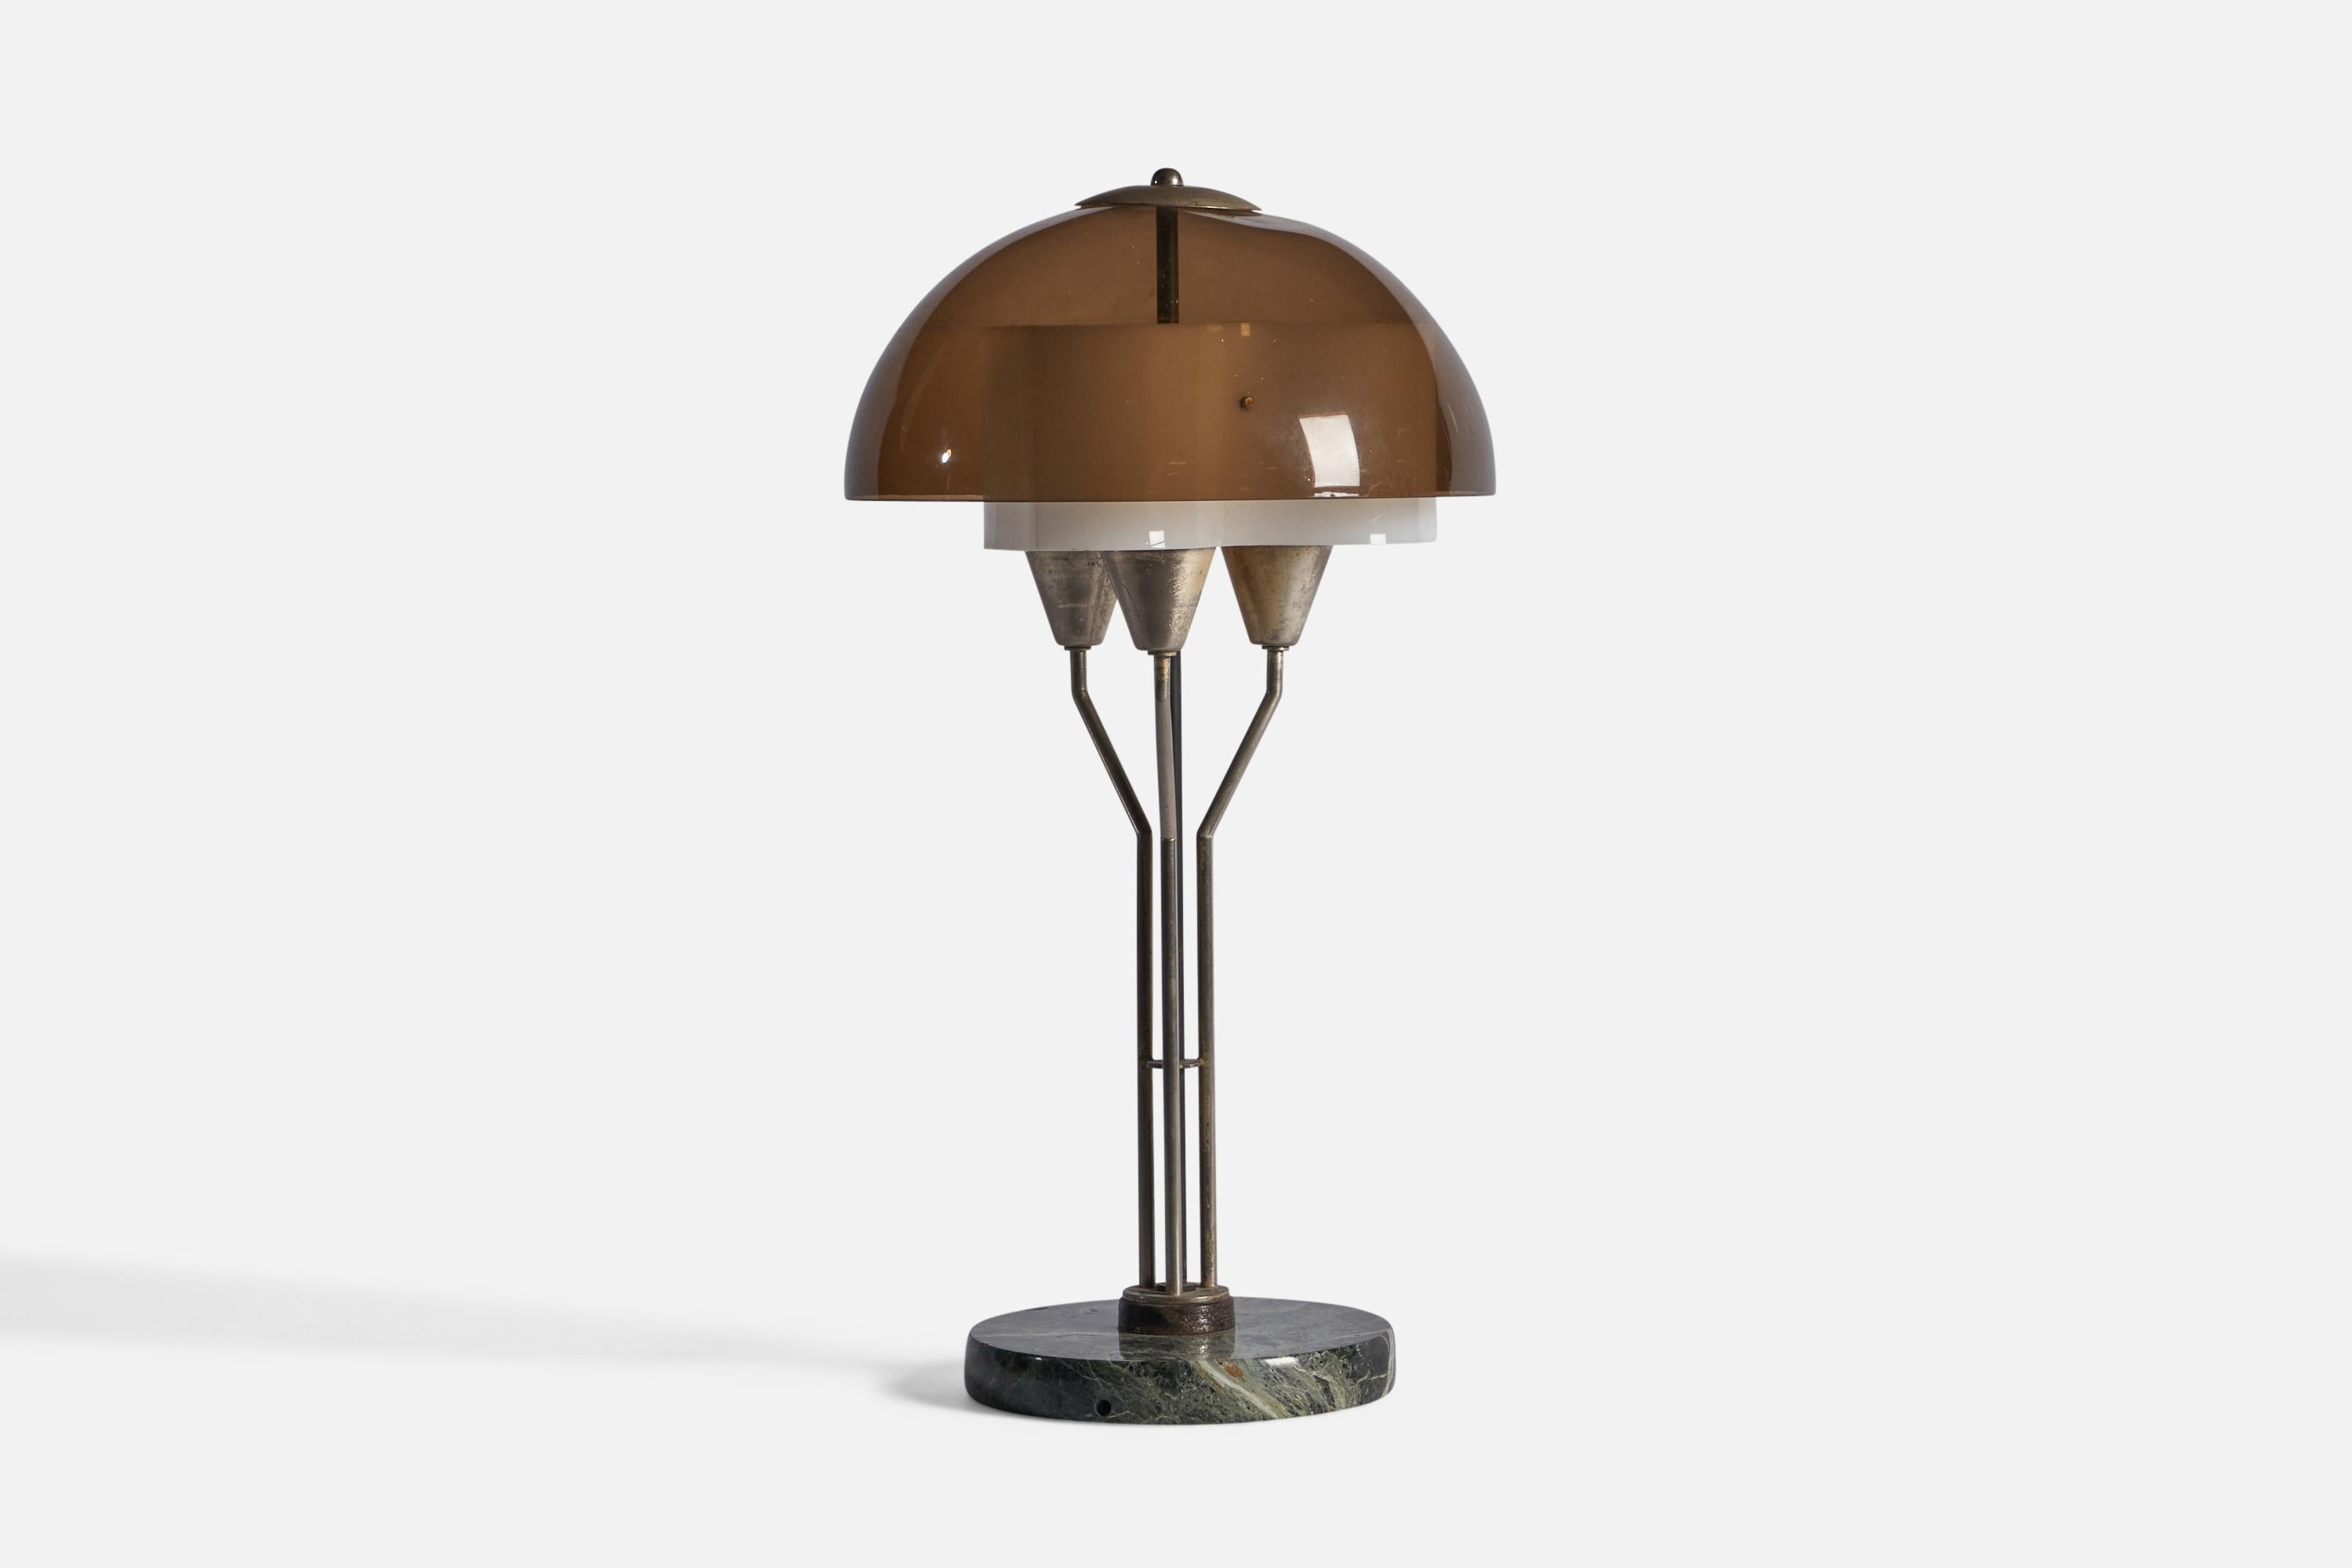 A brass, marble and acrylic table lamp designed by Angelo Brotto and produced by Esperia, Italy, c. 1970s.

Overall Dimensions: 22.5